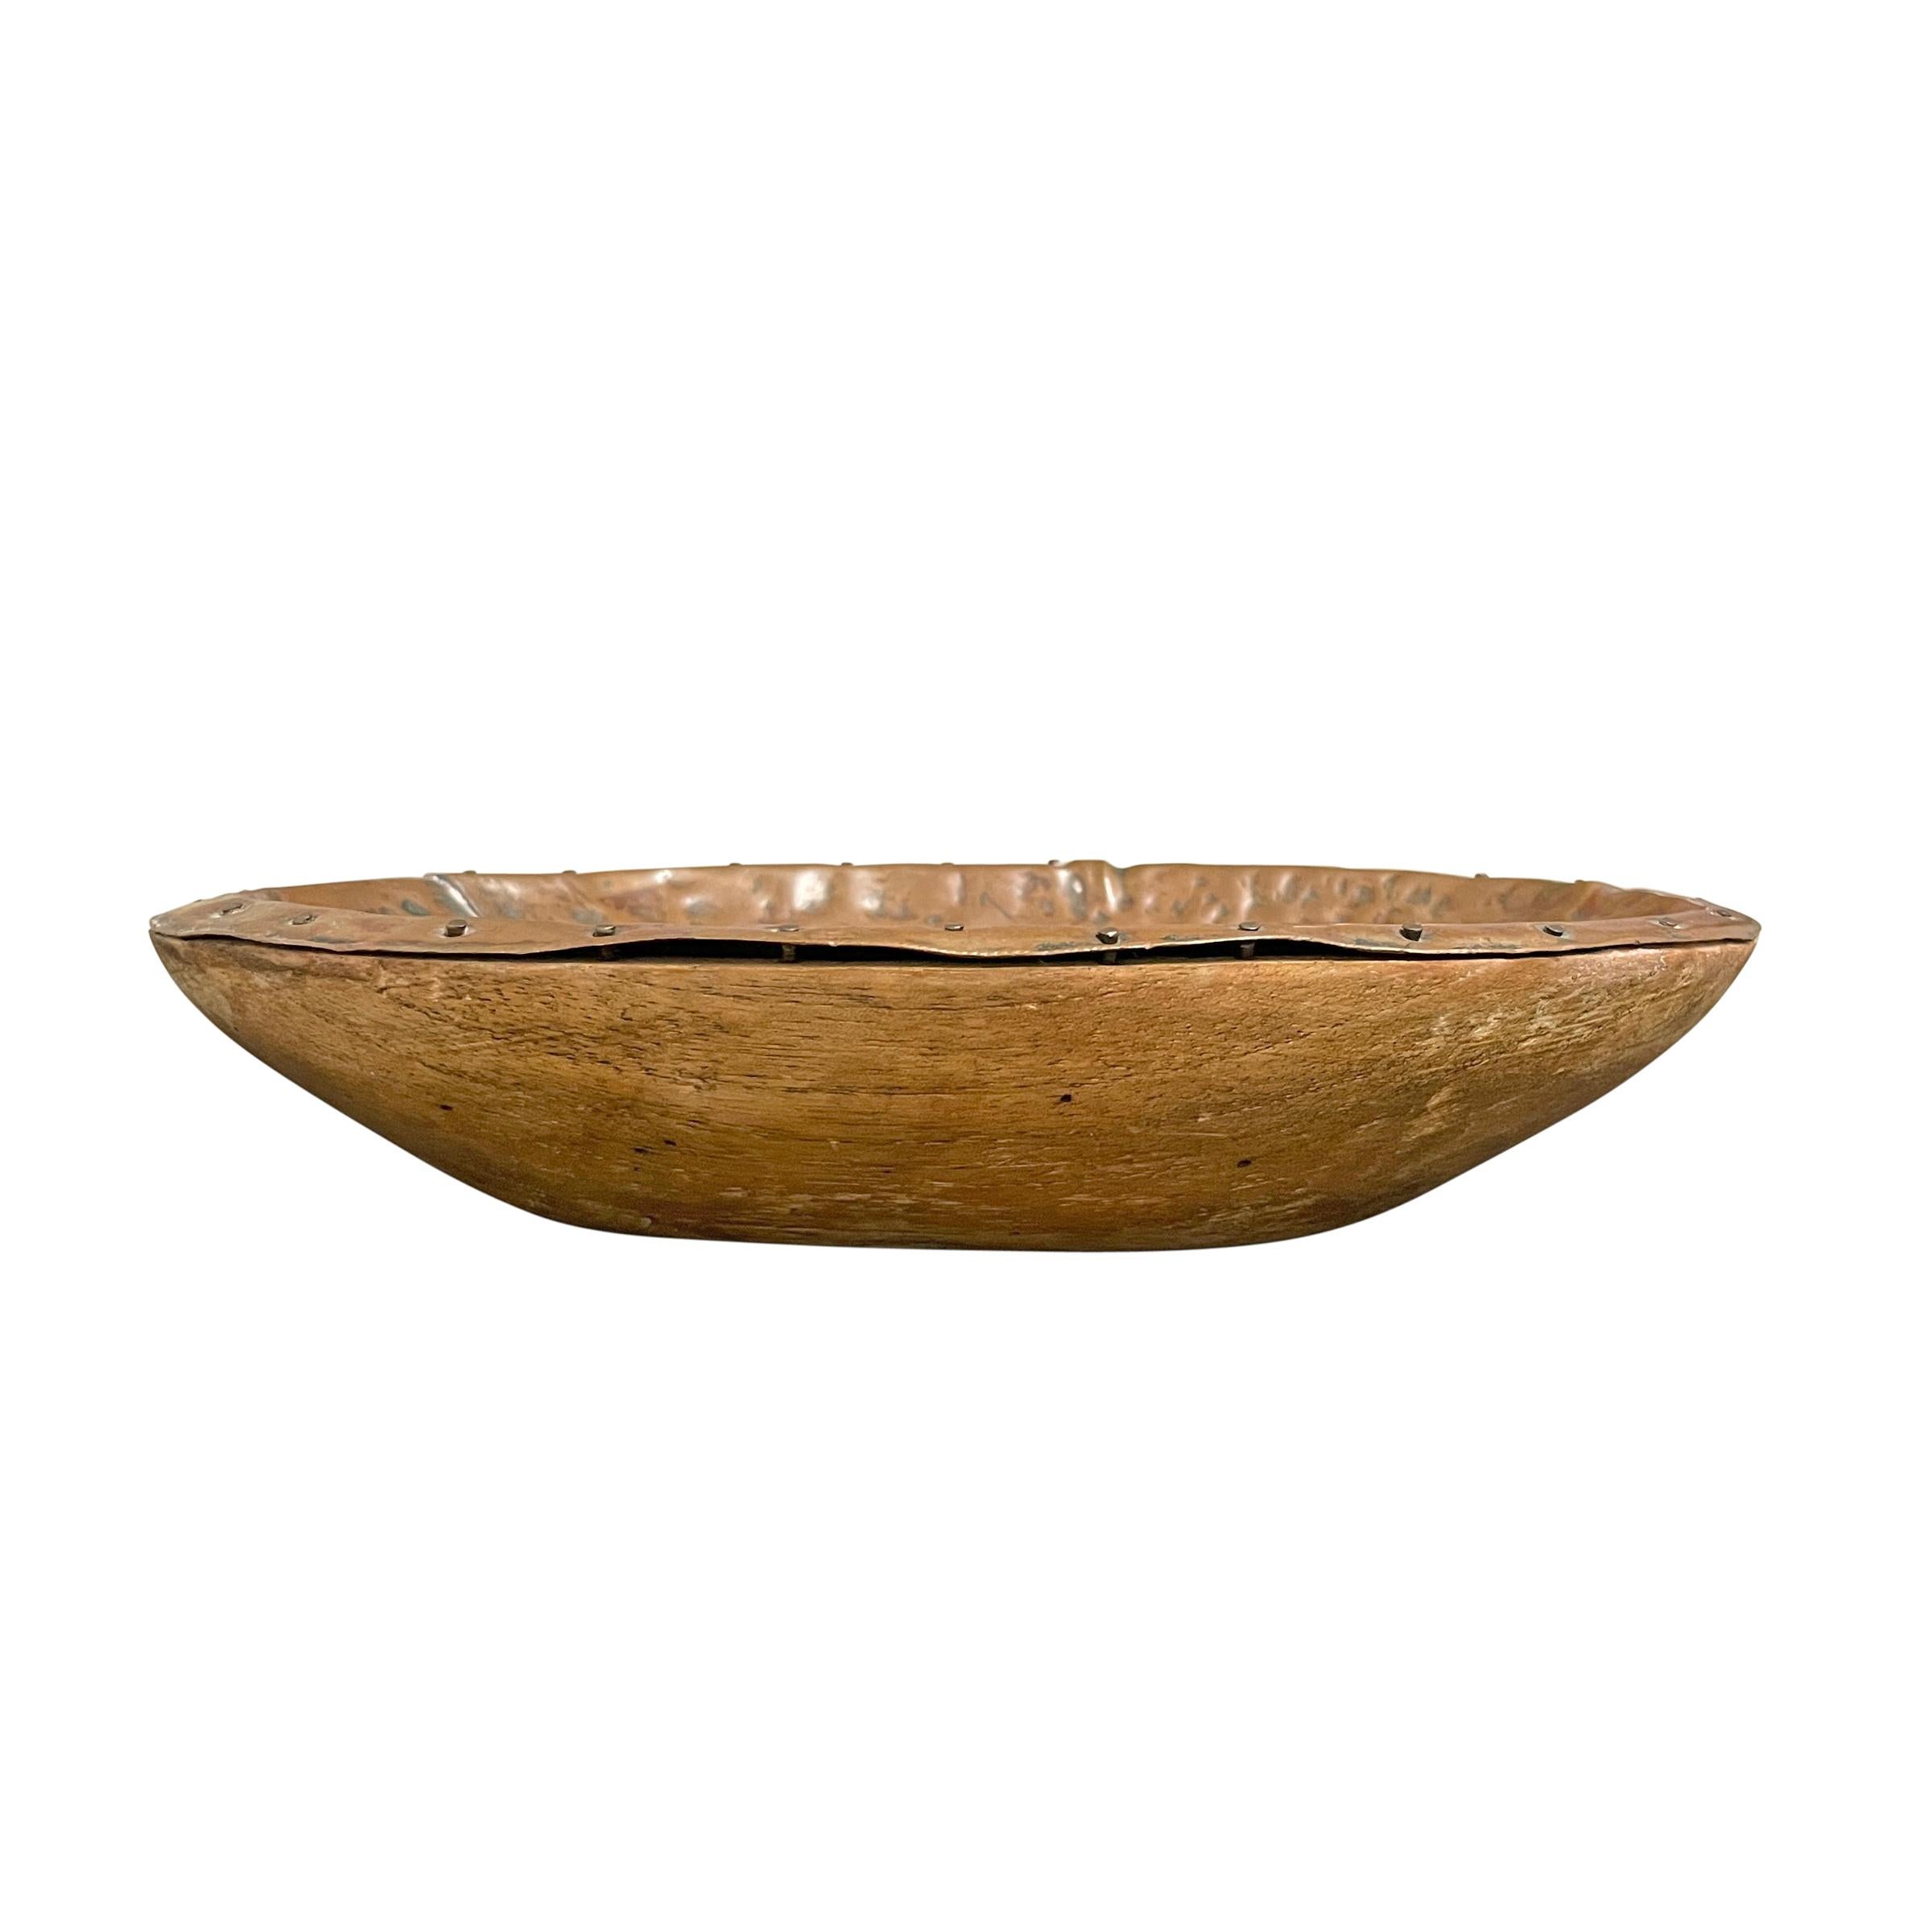 20th Century American Hammered Copper Bowl 1